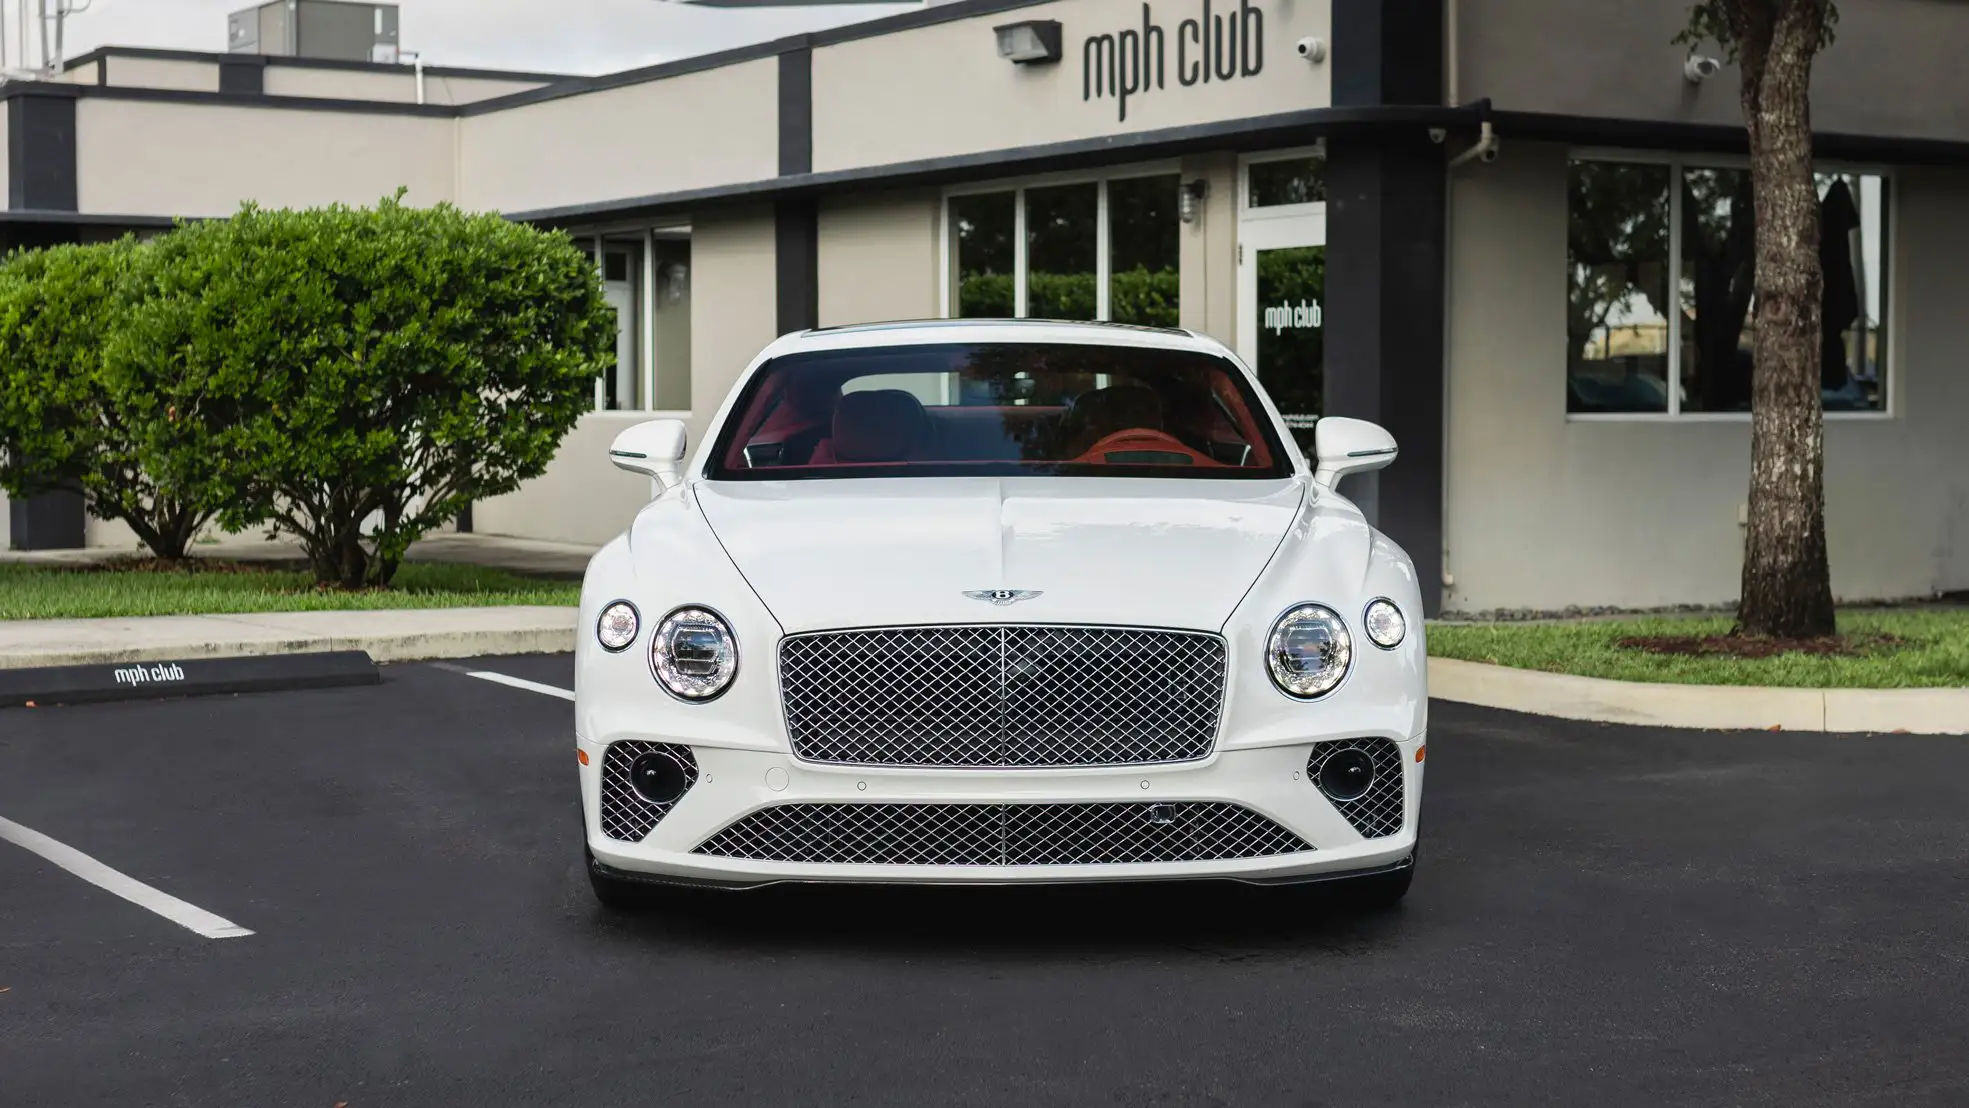 2022 White Bentley Continental GT Speed for sale exterior 6